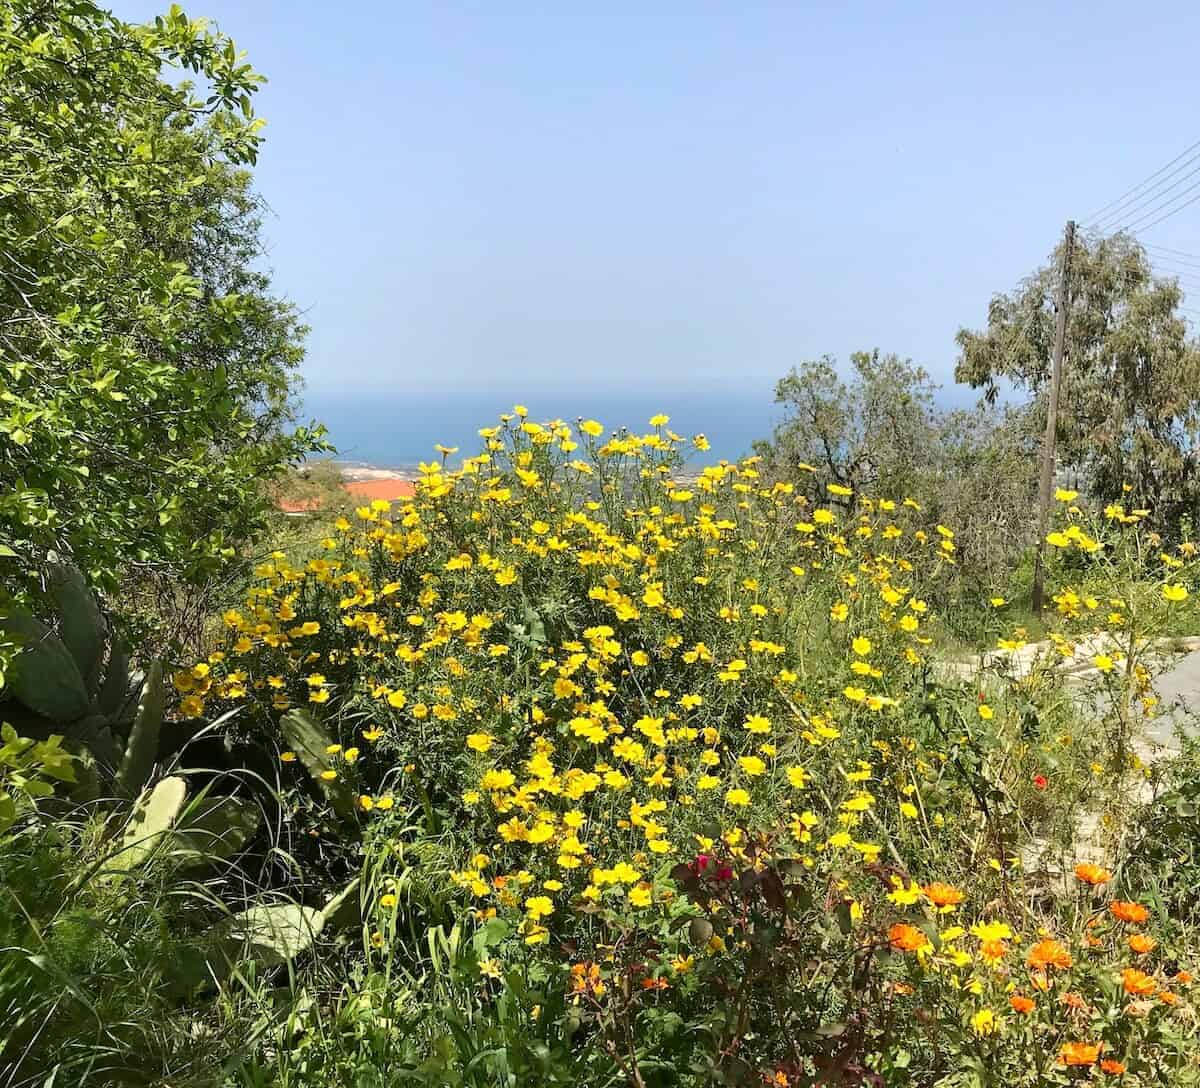 A close up of a flower garden in Cyprus.